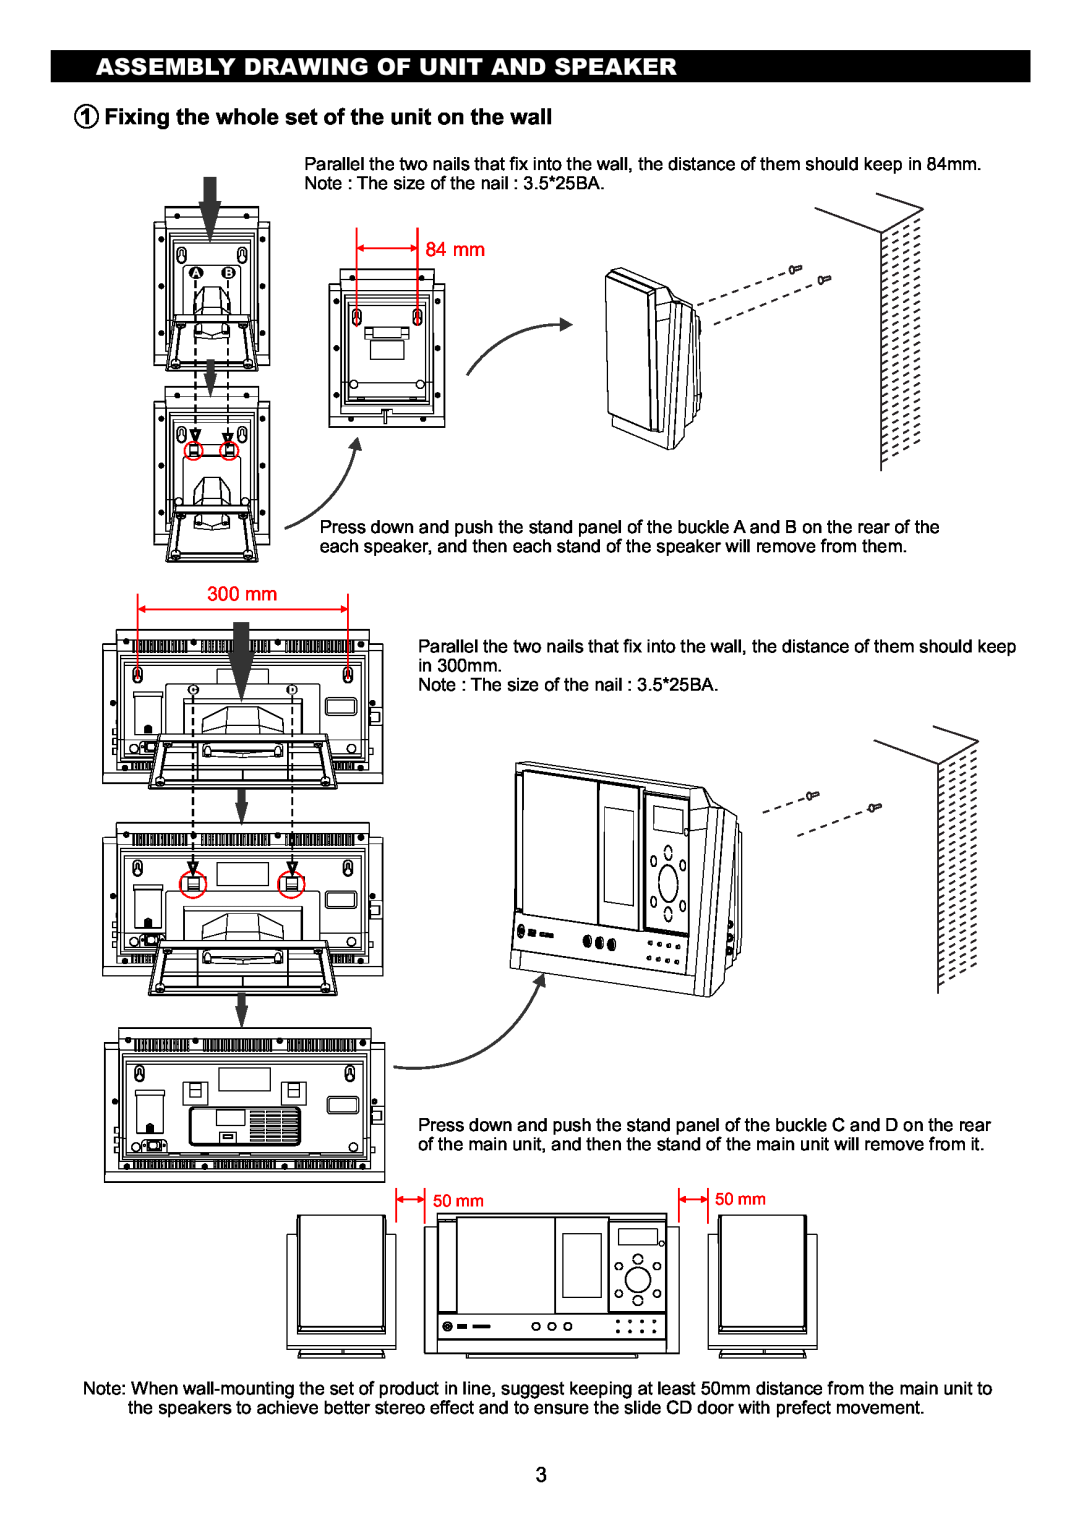 Sanyo DC-MX41i Assembly Drawing Of Unit And Speaker, Fixing the whole set of the unit on the wall, 84 mm, 300 mm, 50 mm 